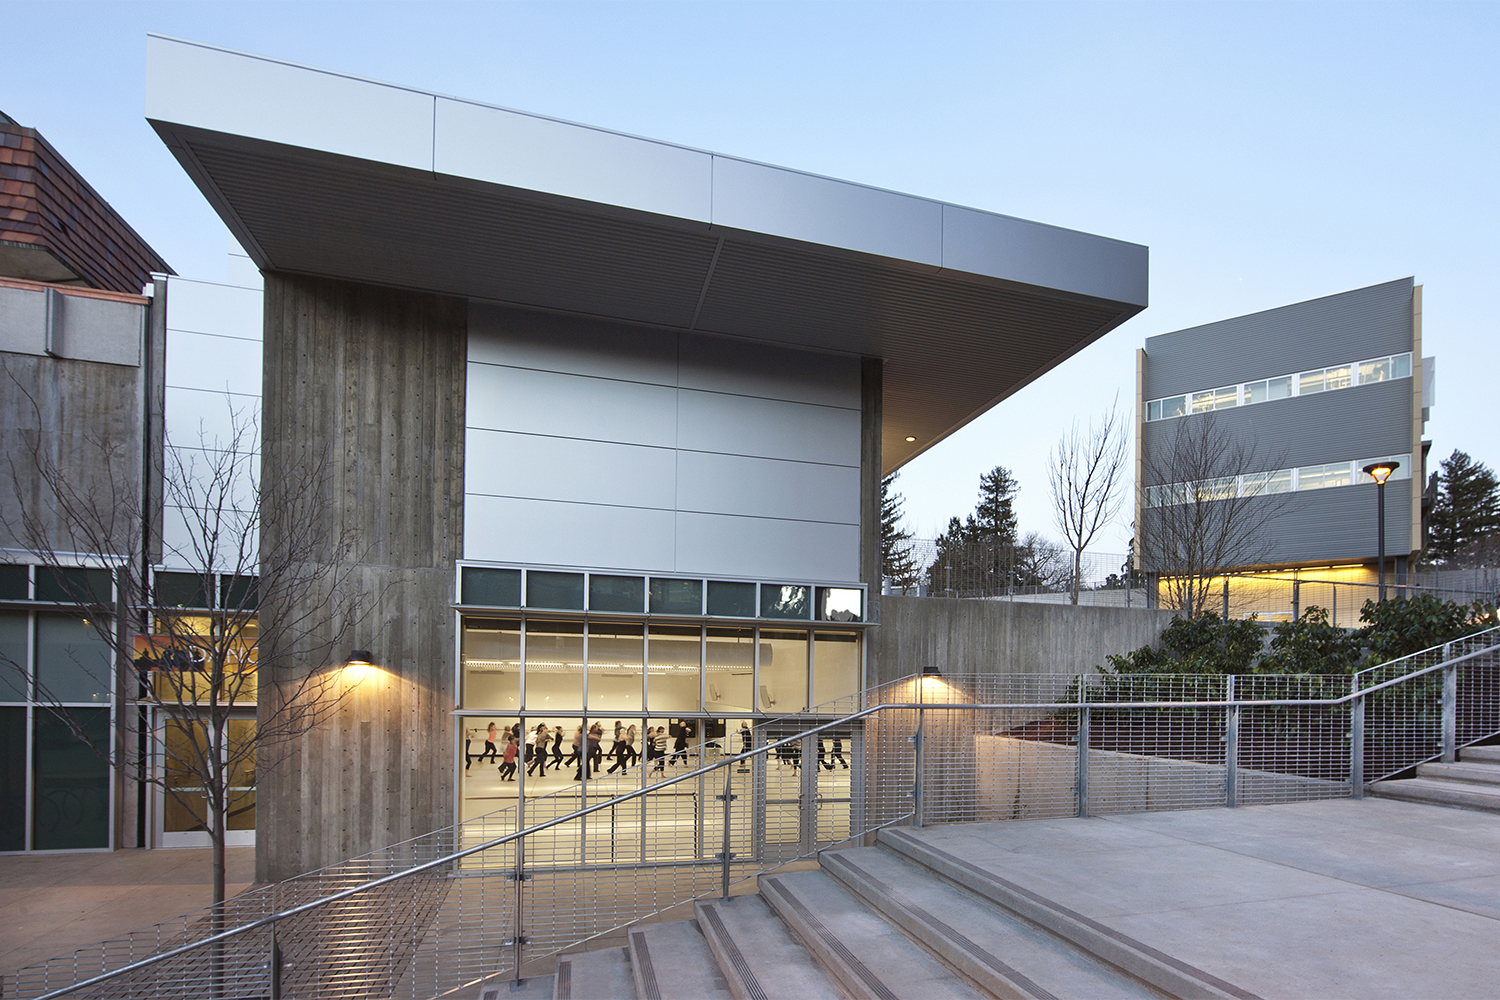 05_Projects_Community College Complex - Performing Arts Building.jpg